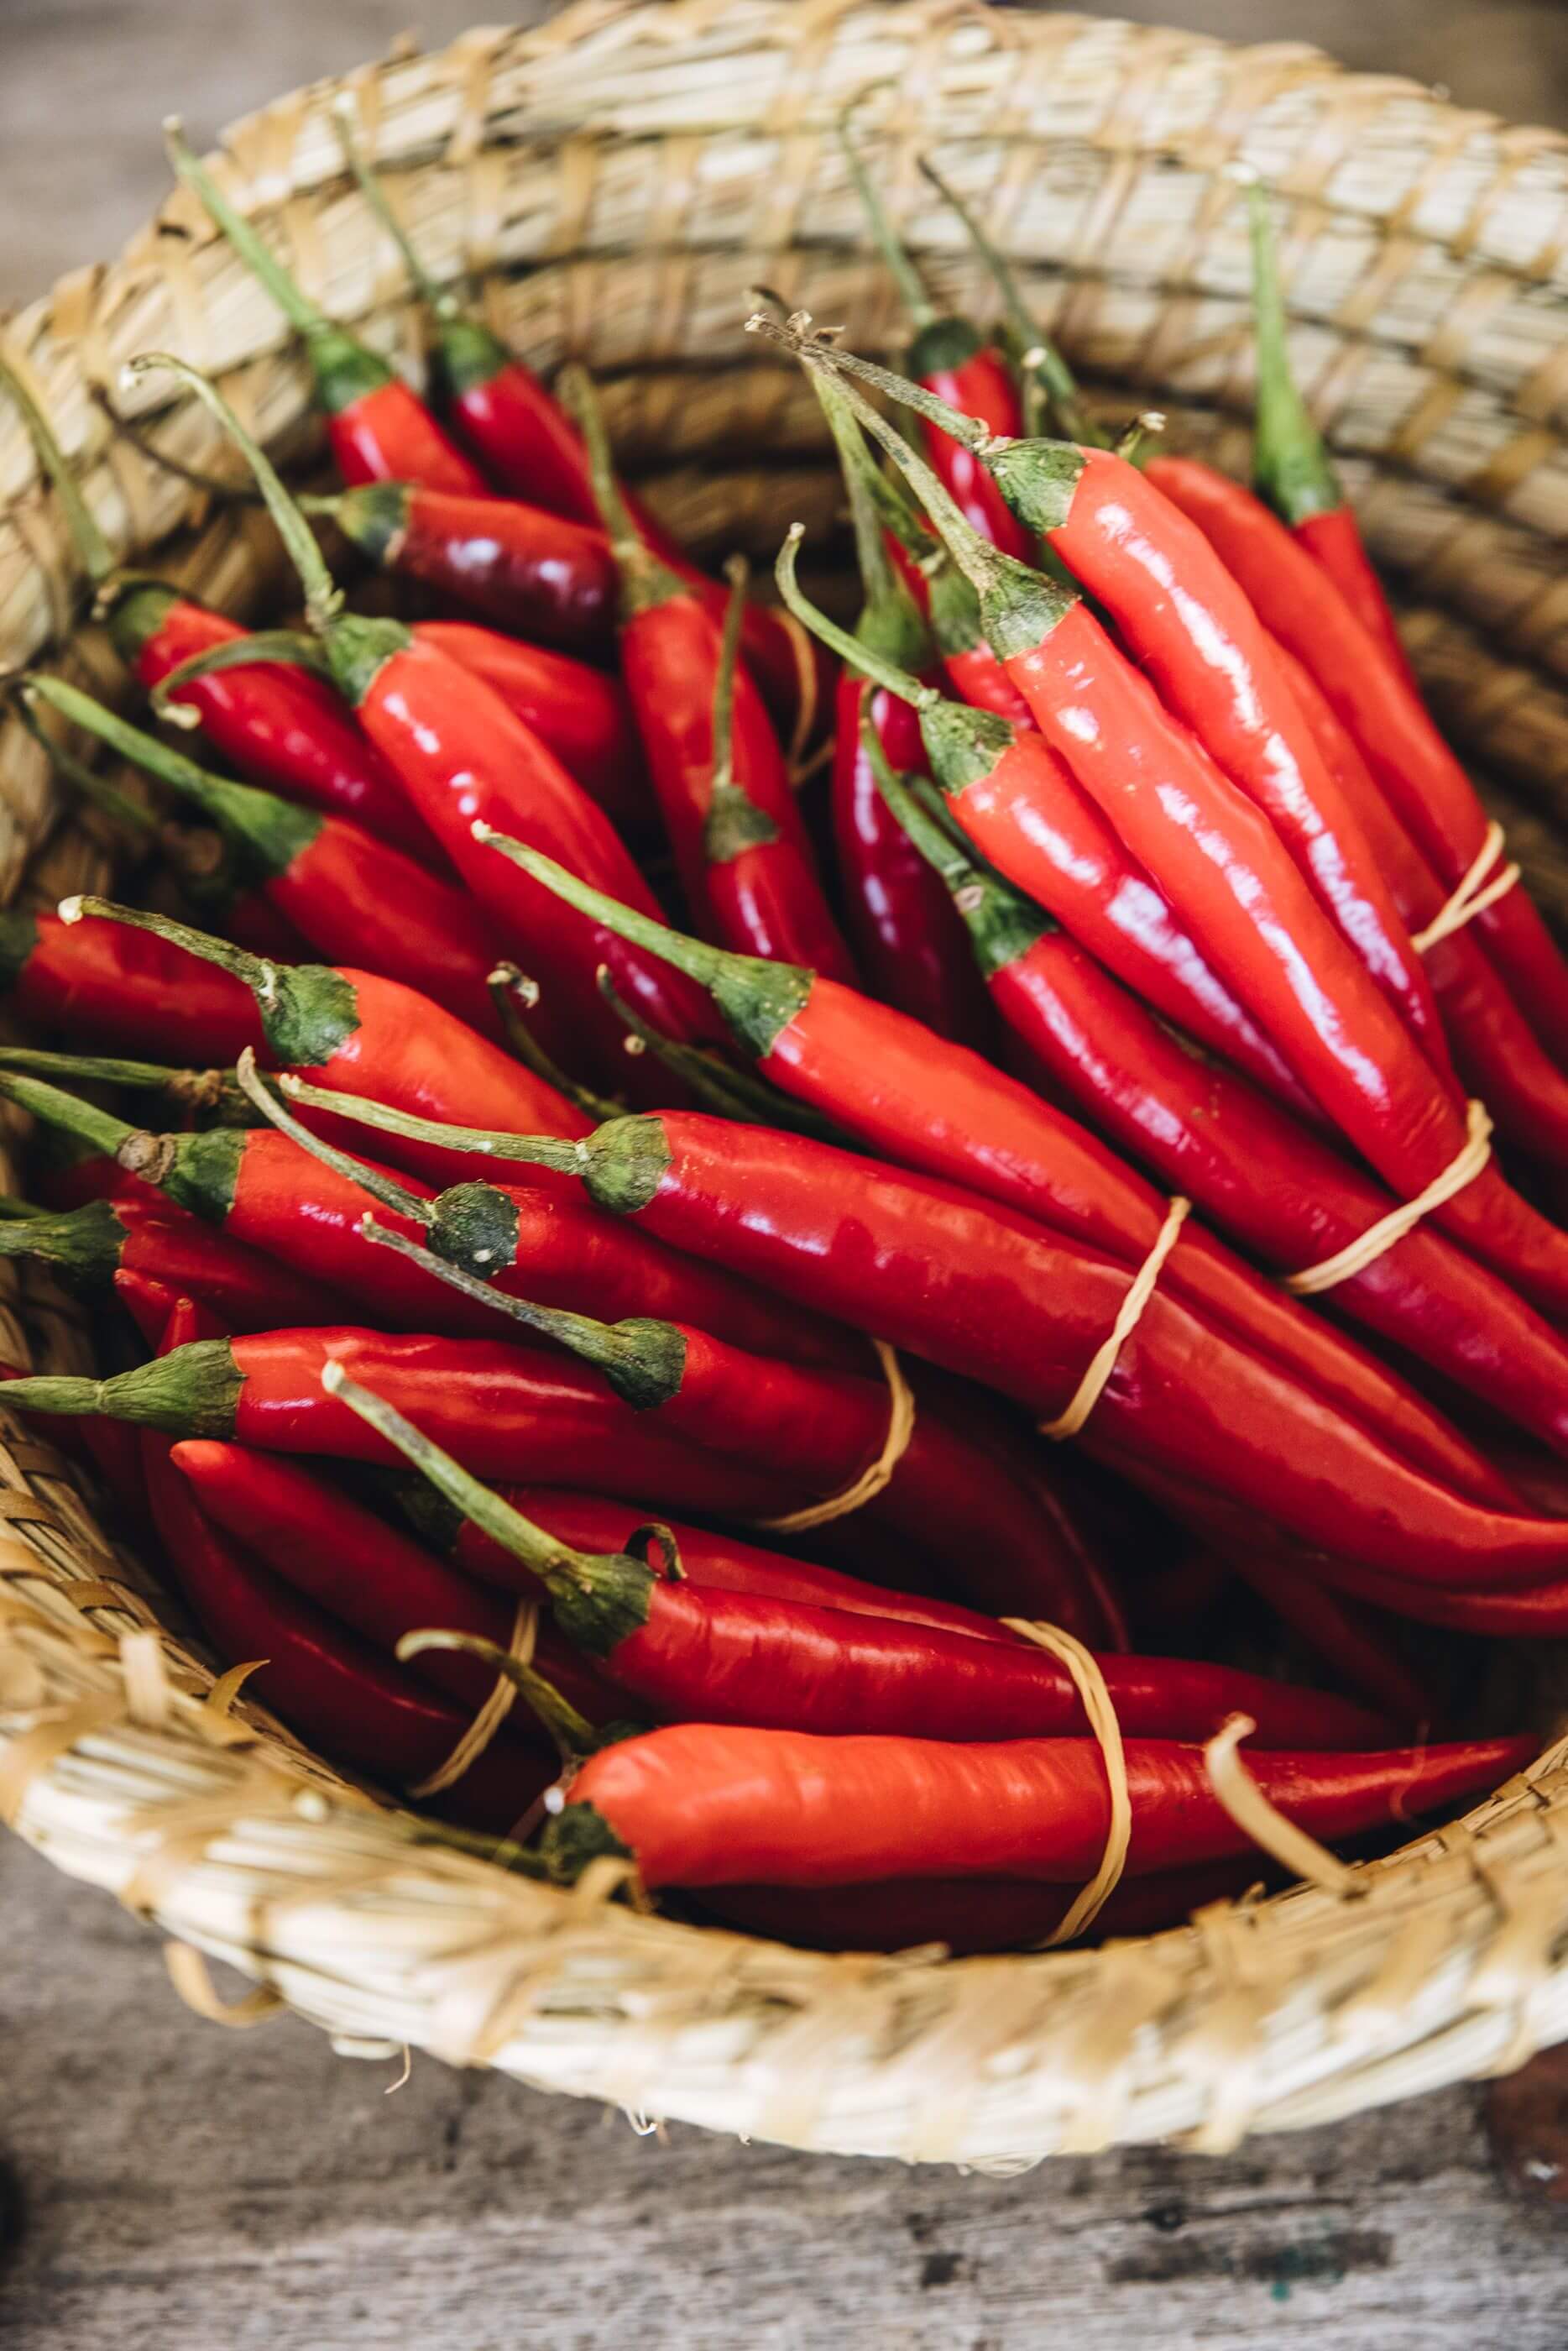 fresh red chillis in a basket